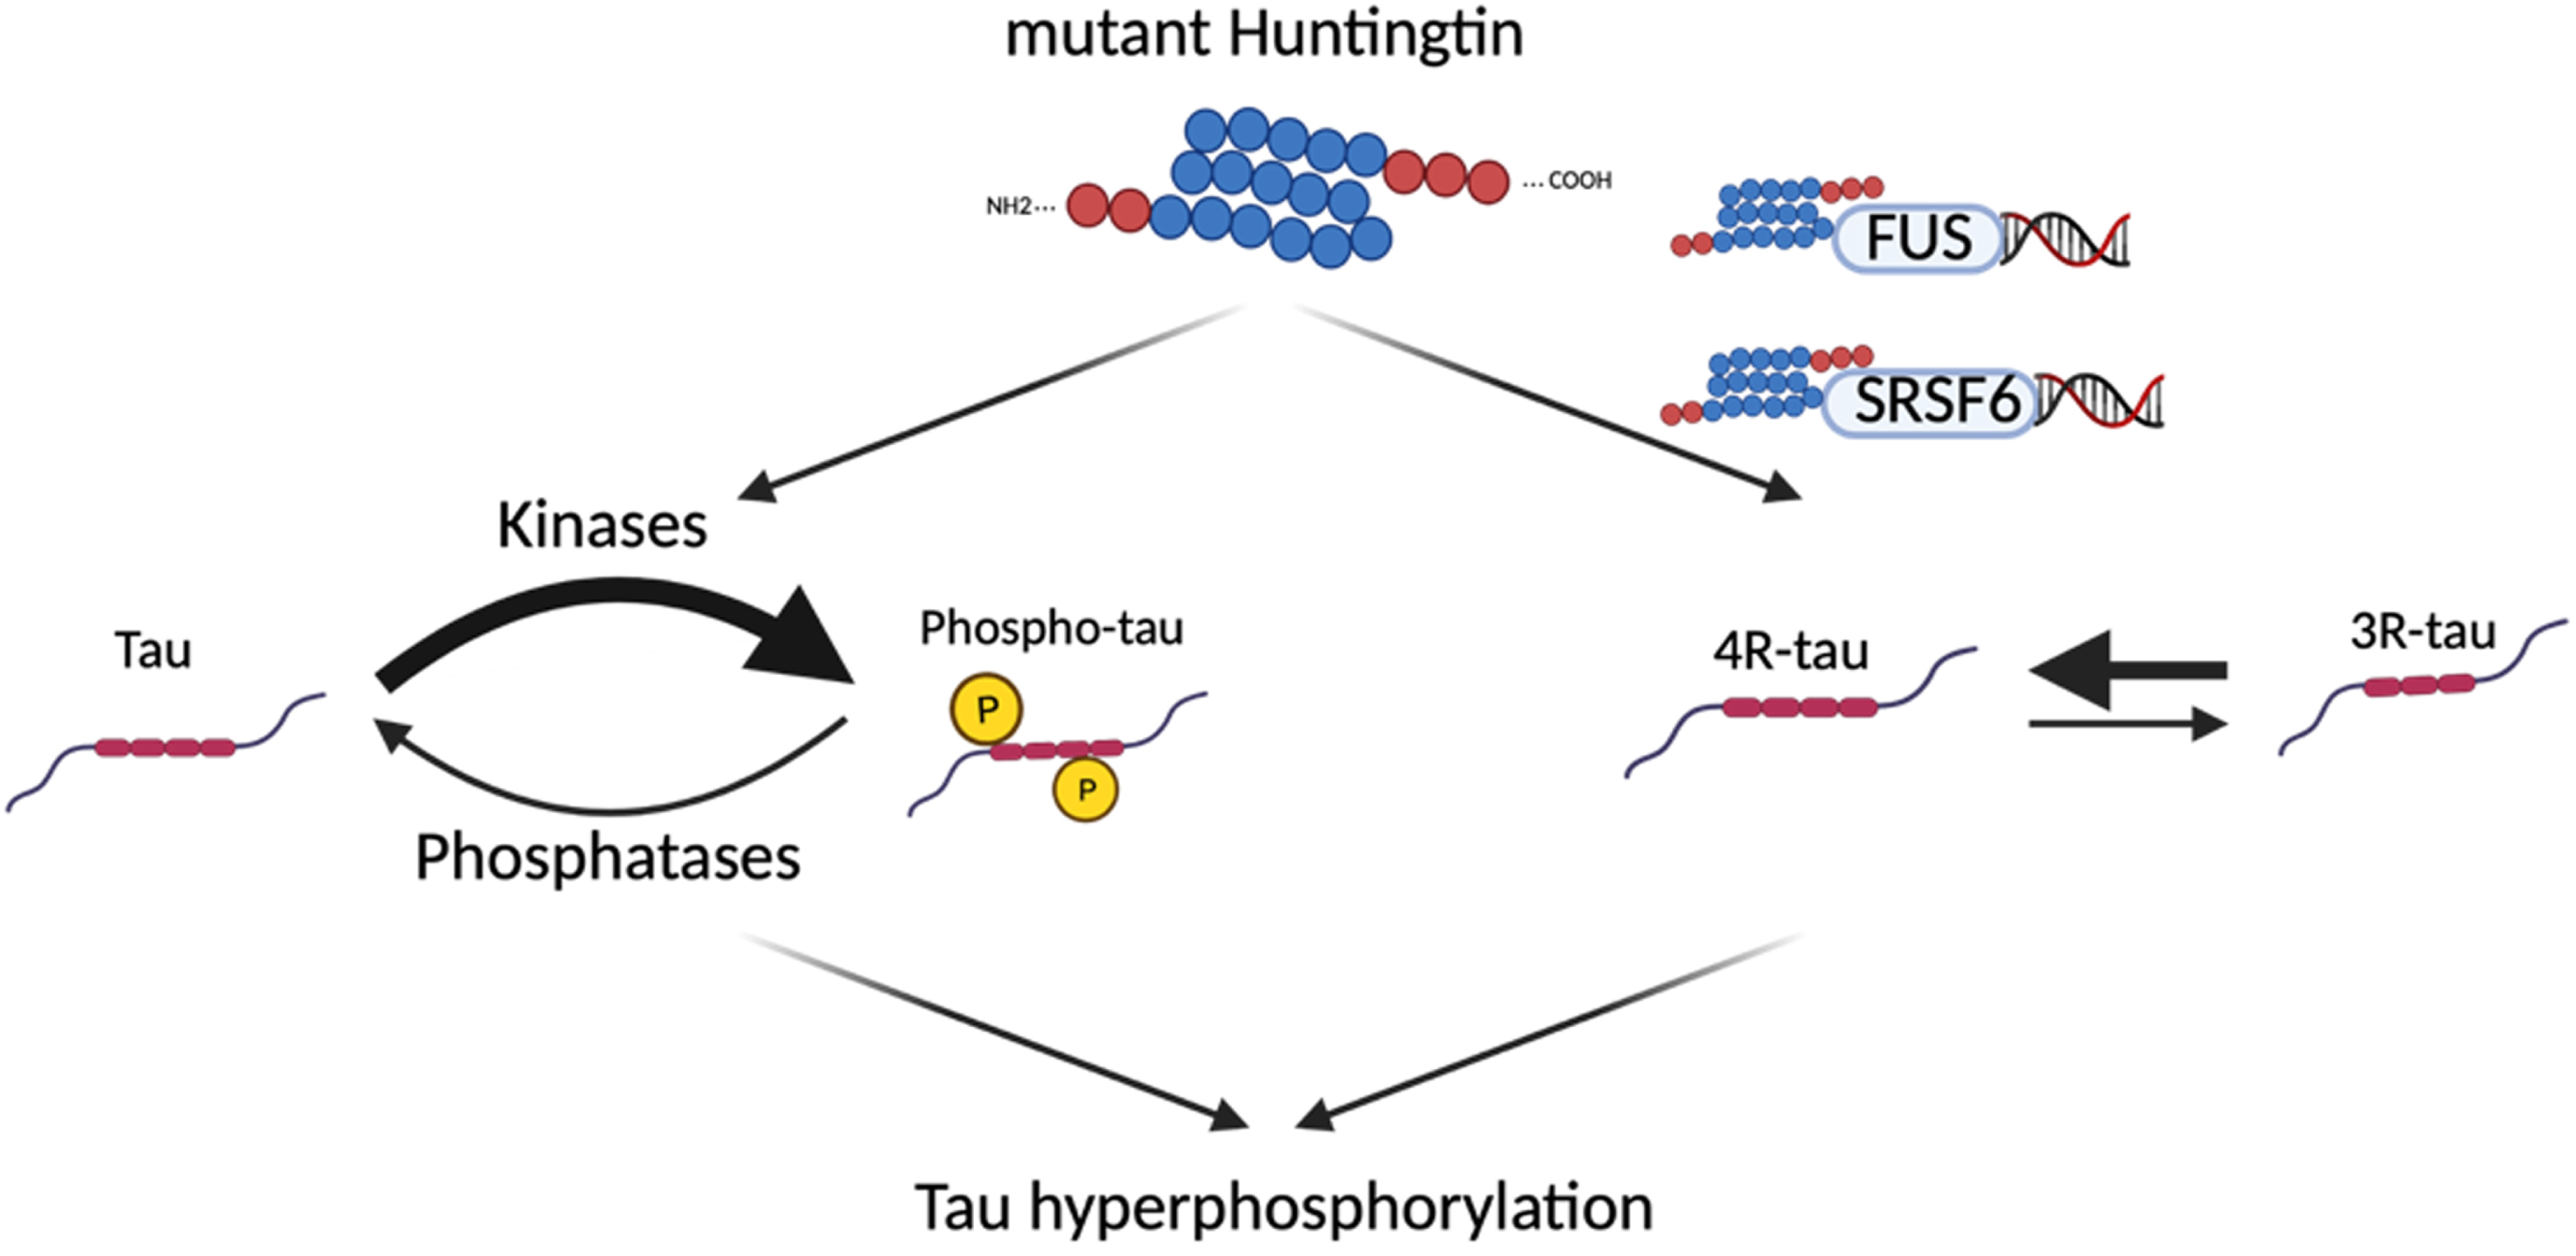 Potential mechanisms leading to tau hyperphosphorylation in Huntington’s disease. Since mutant huntingtin does not directly interact with tau, several hypotheses have been explored to explain the tau hyperphosphorylation seen in HD, including an interaction between the mutant huntingtin and tau kinases/phosphatases, and an interaction between mutant huntingtin and proteins involved in tau alternative splicing (FUS, SRSF6).